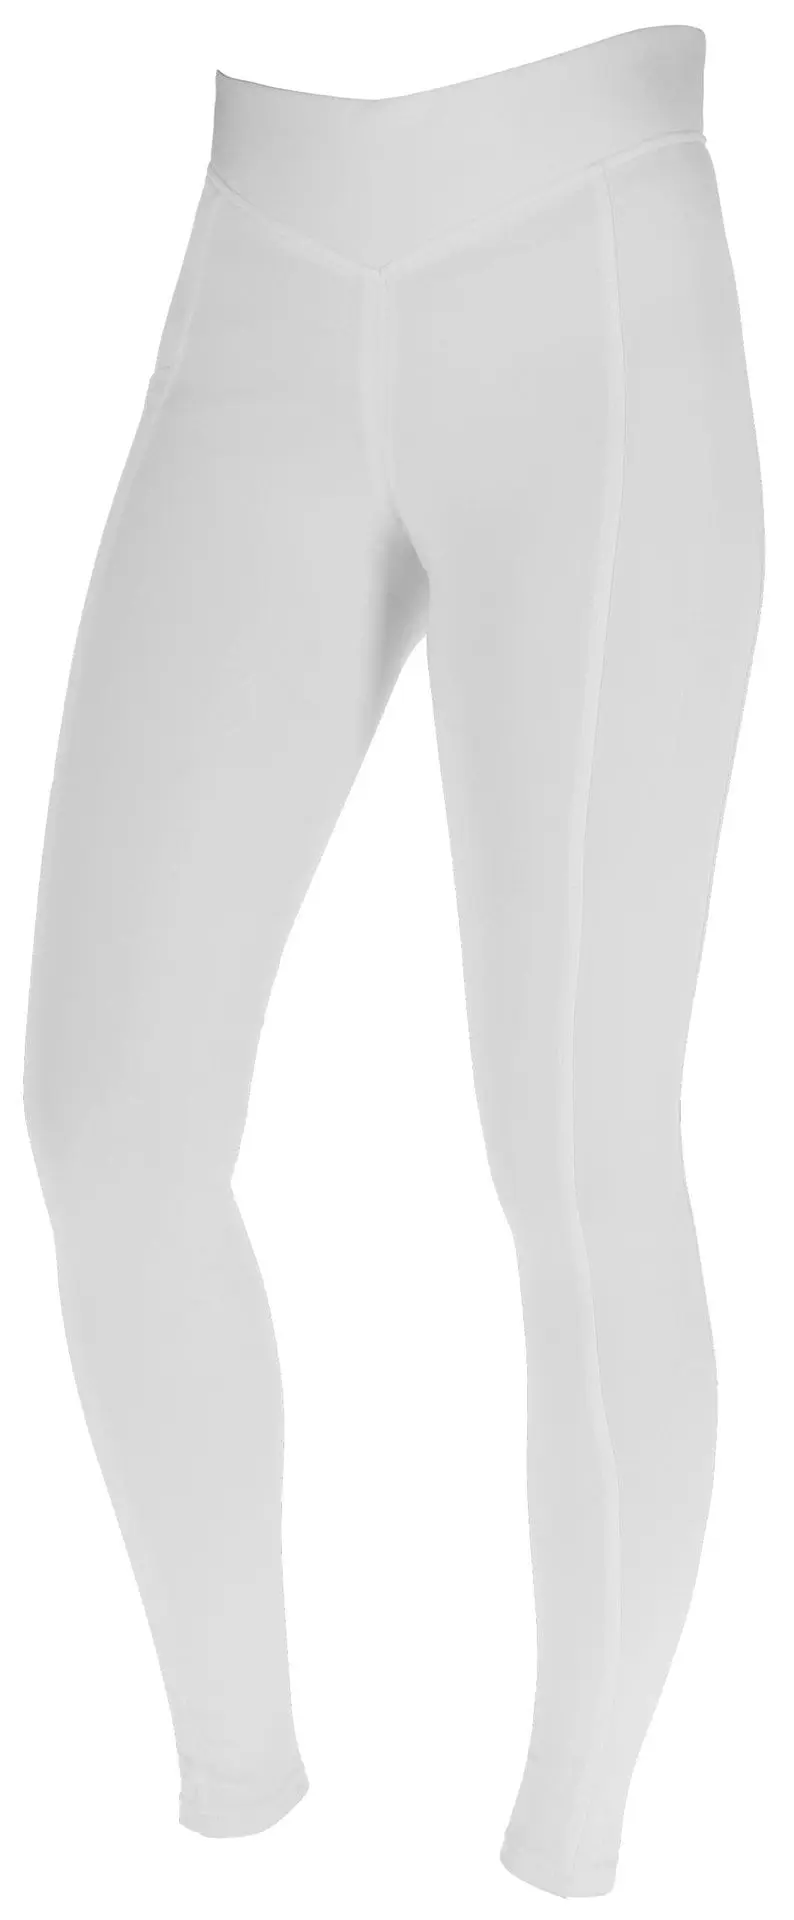 Rid. Tights ClassicStar Ladies white, Size 42/44